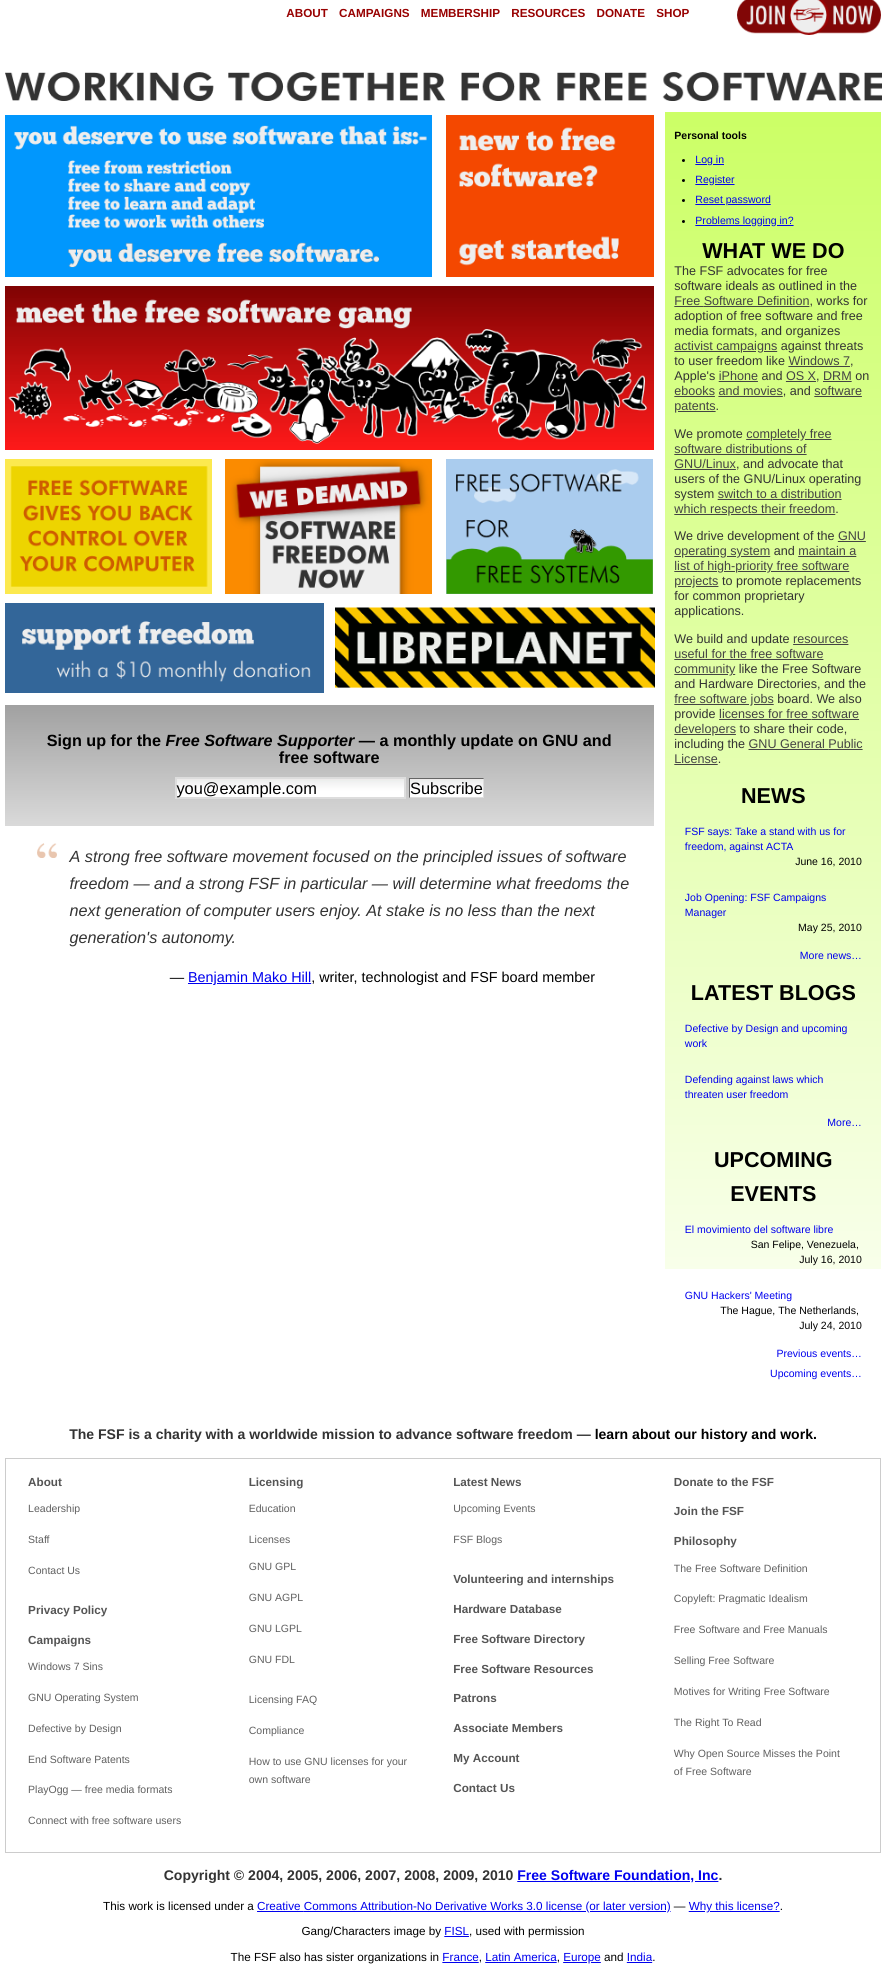 The FSF's Web site in 2010